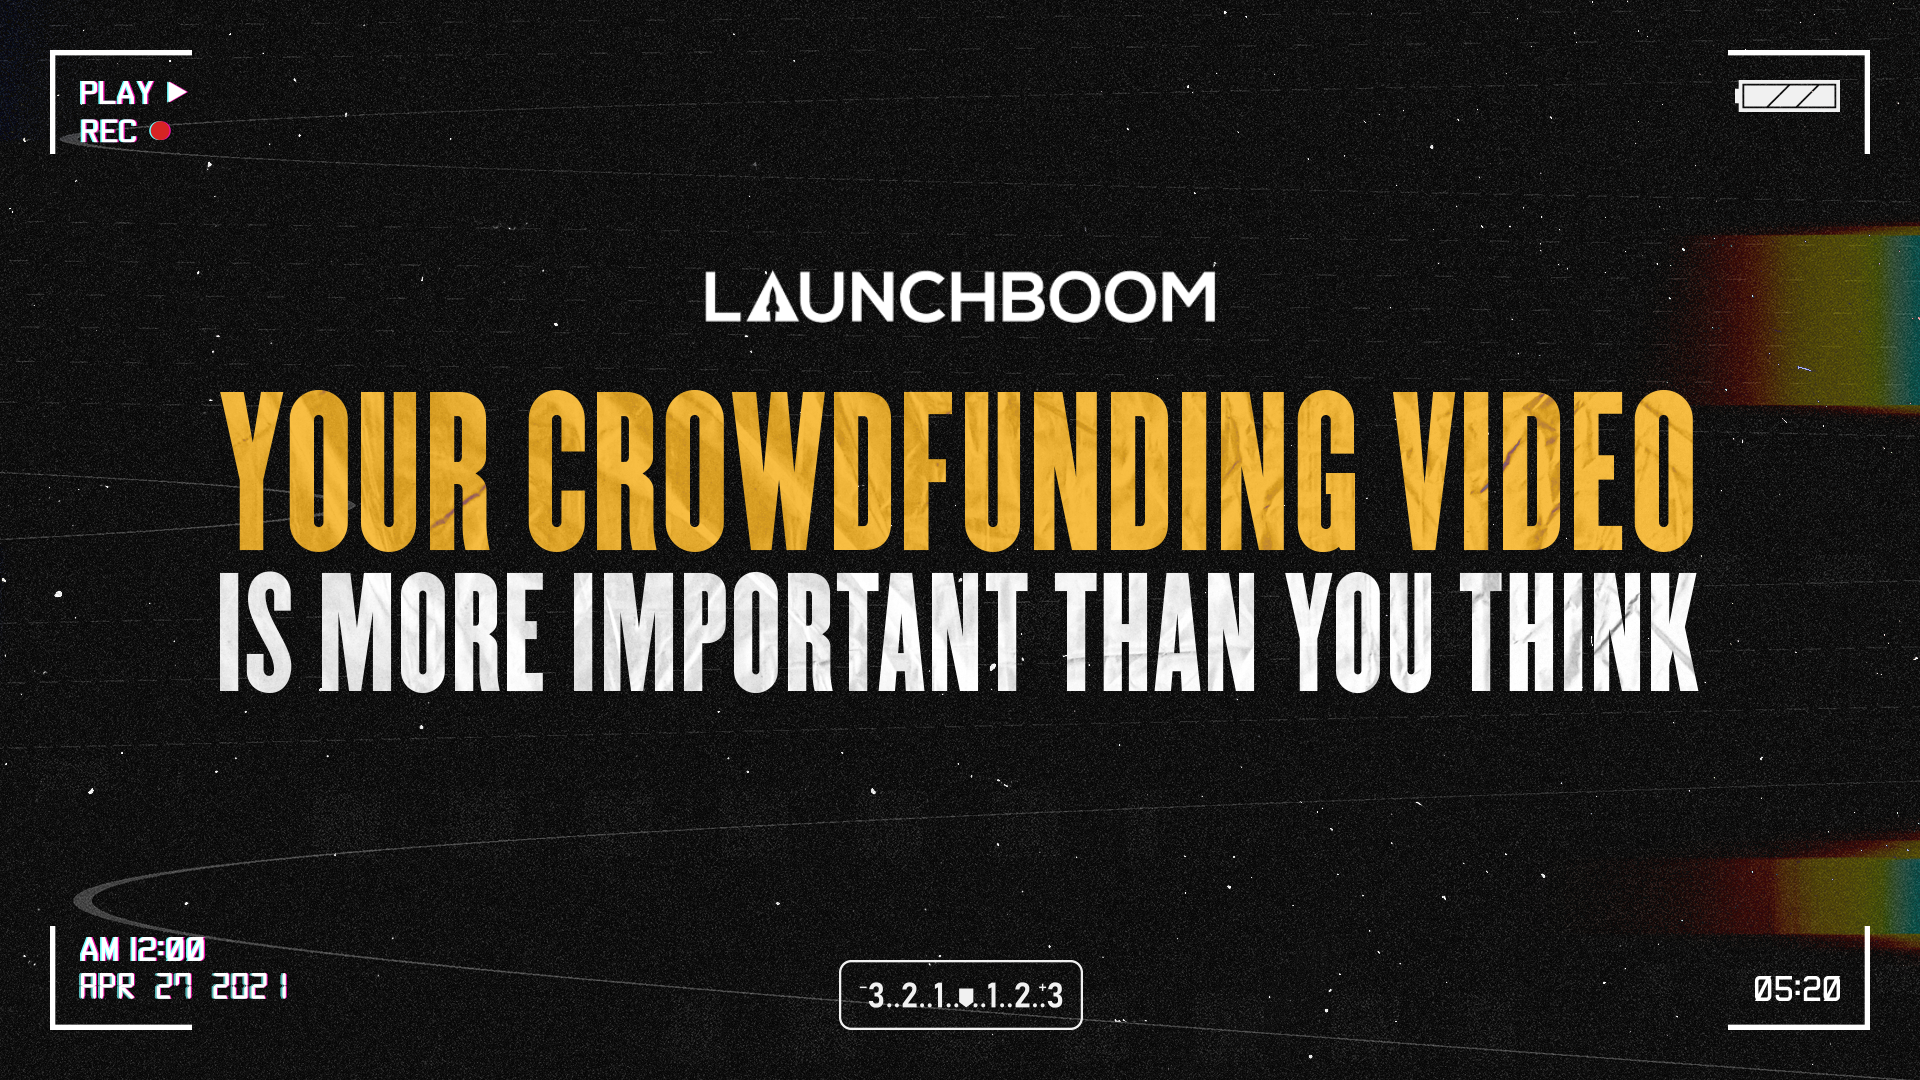 Your crowdfunding video is more important than you think